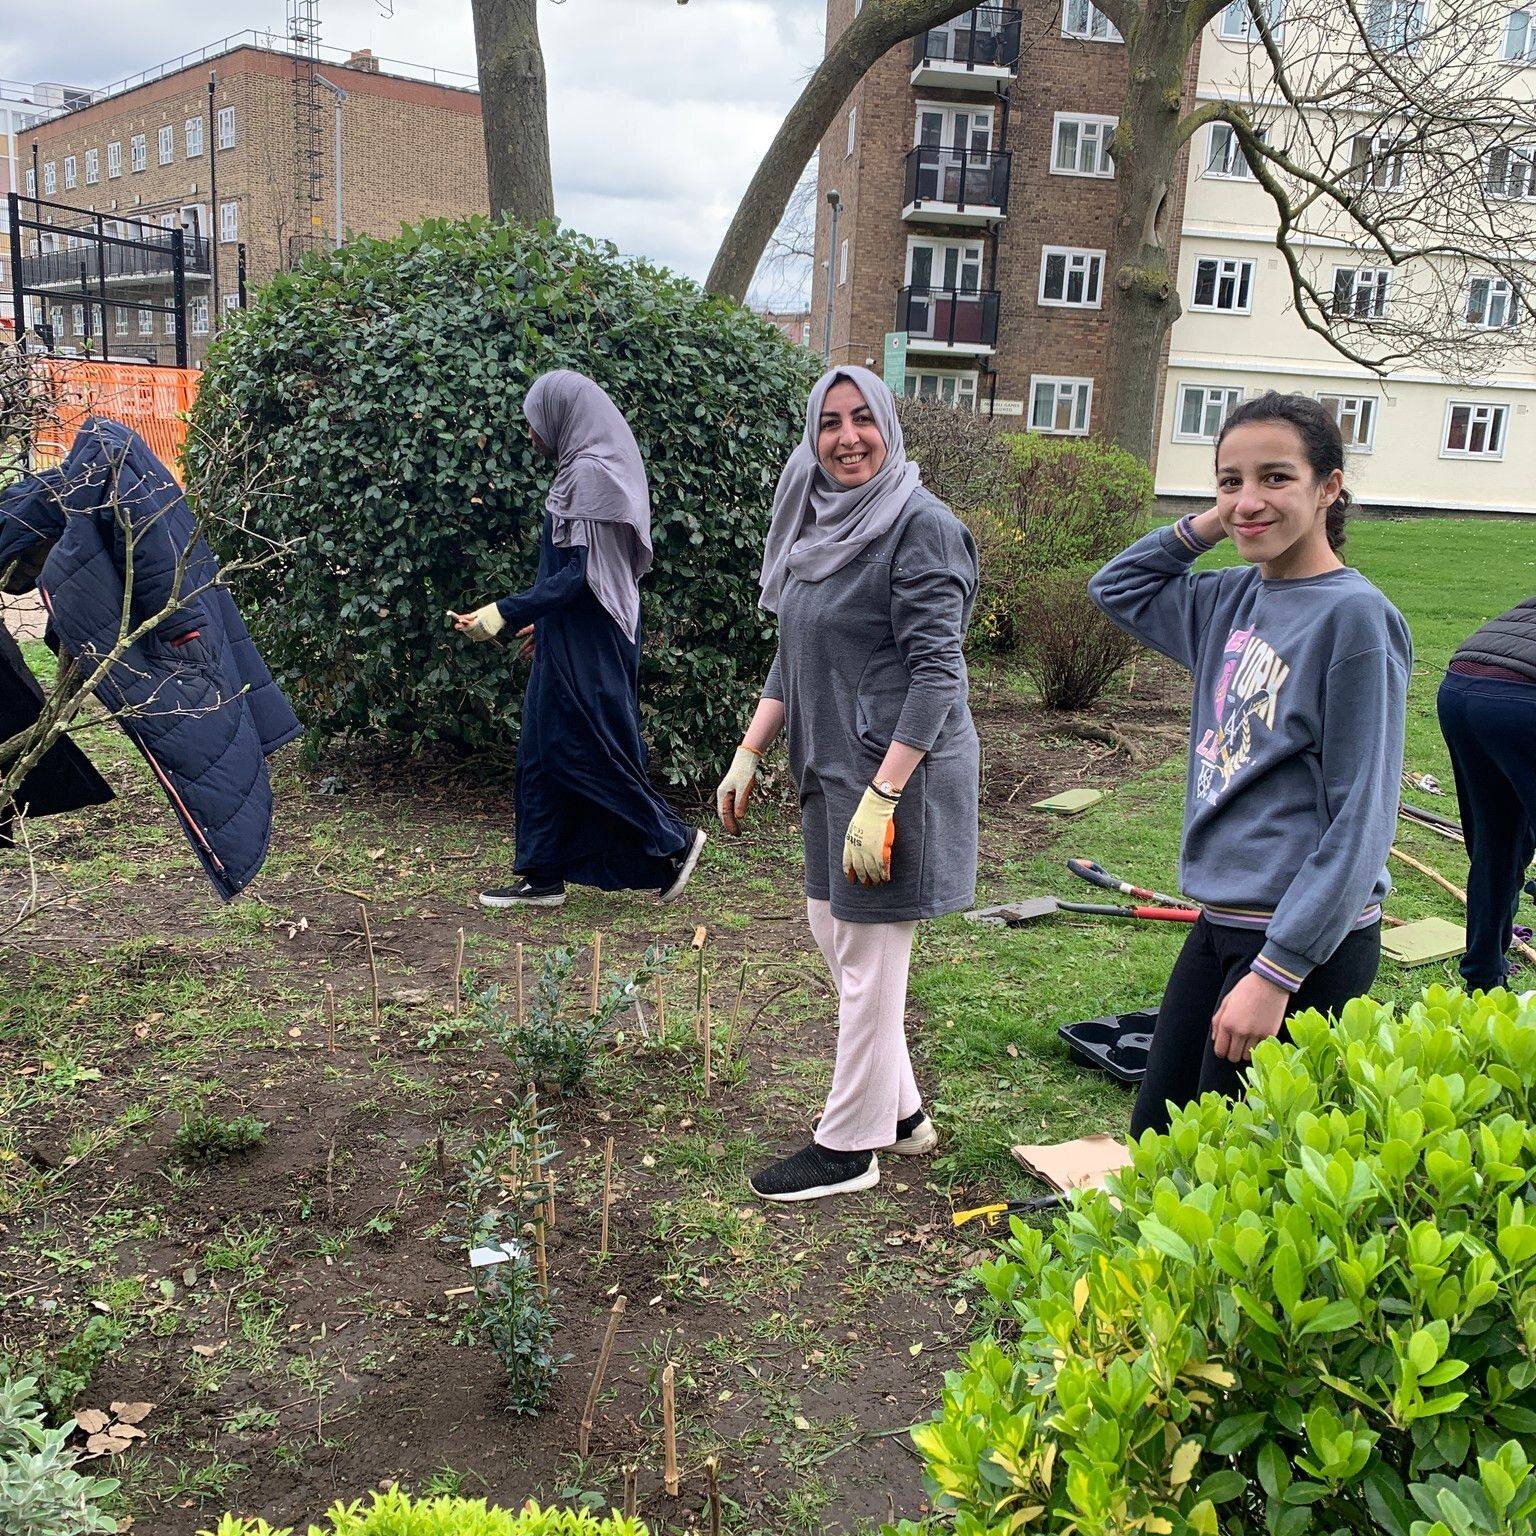 Here a few more photos from last month's session run by @iamorsetta and Anke at Roupell Park Estate with the support of Roupell Park RMO. It's great to see residents come out and plant to green their estate. We'll be running sessions monthly until Ju